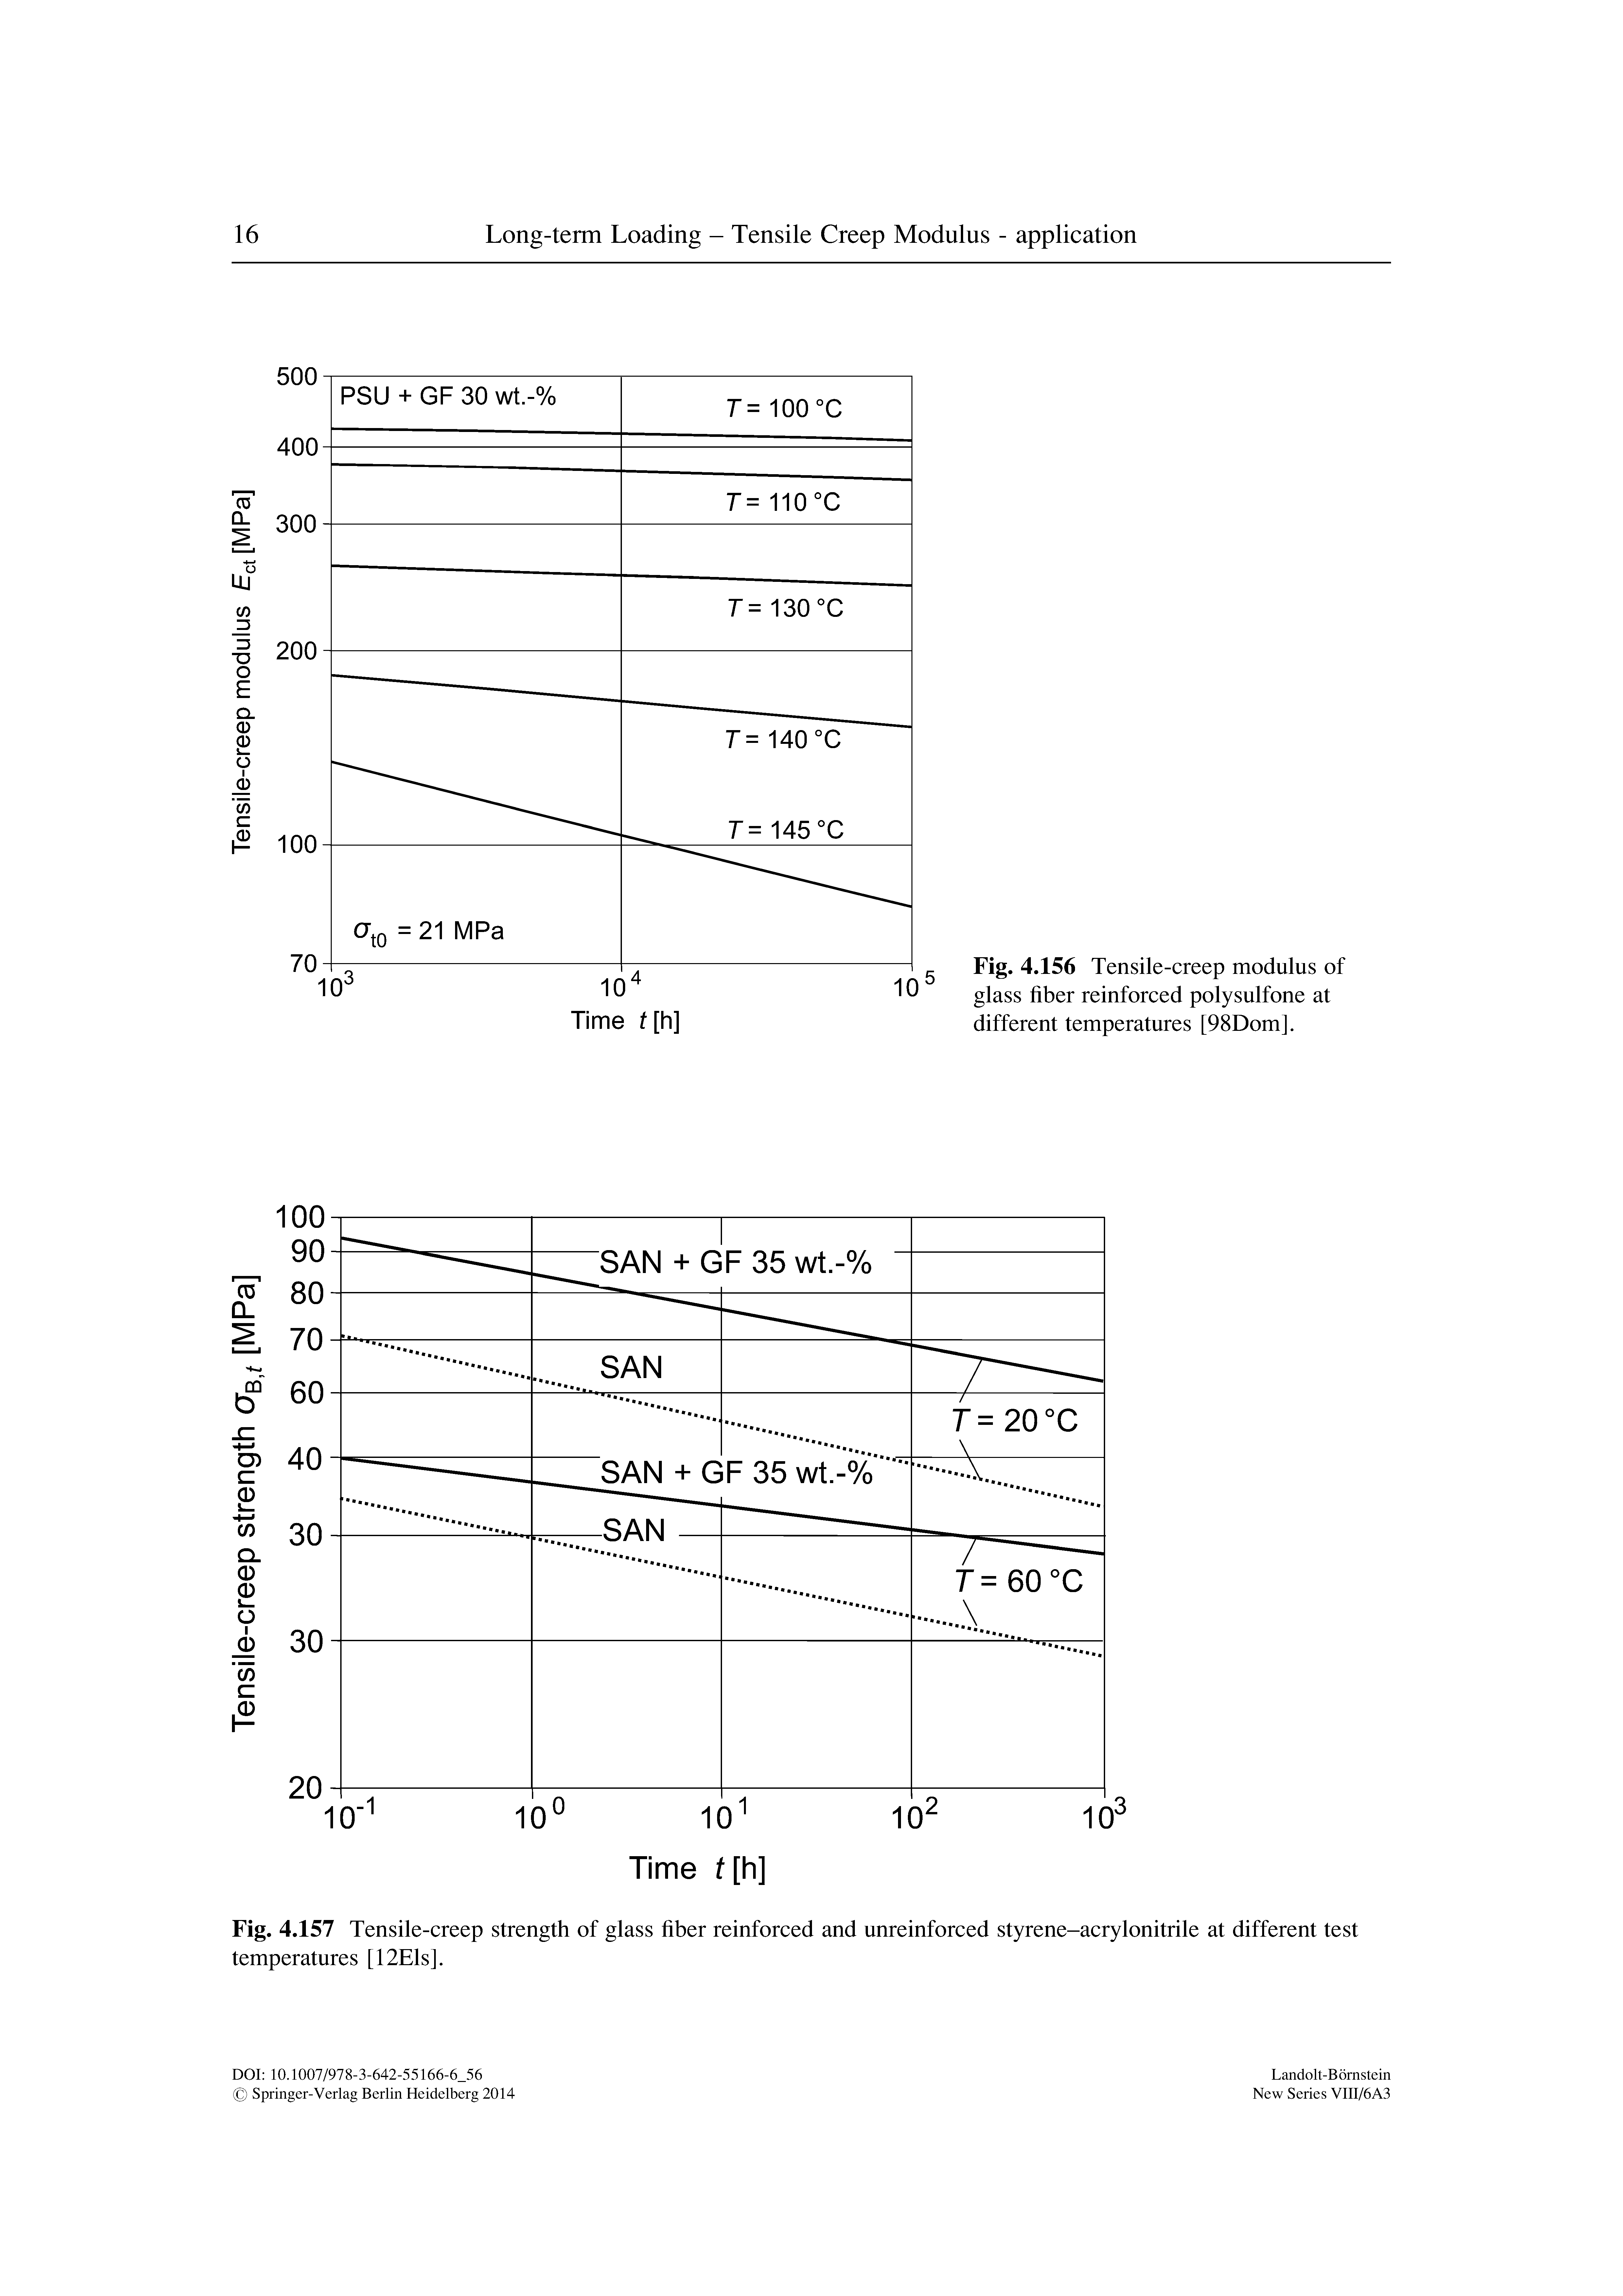 Fig. 4.157 Tensile-creep strength of glass fiber reinforced and unreinforced styrene-acrylonitrile at different test temperatures [12Els].